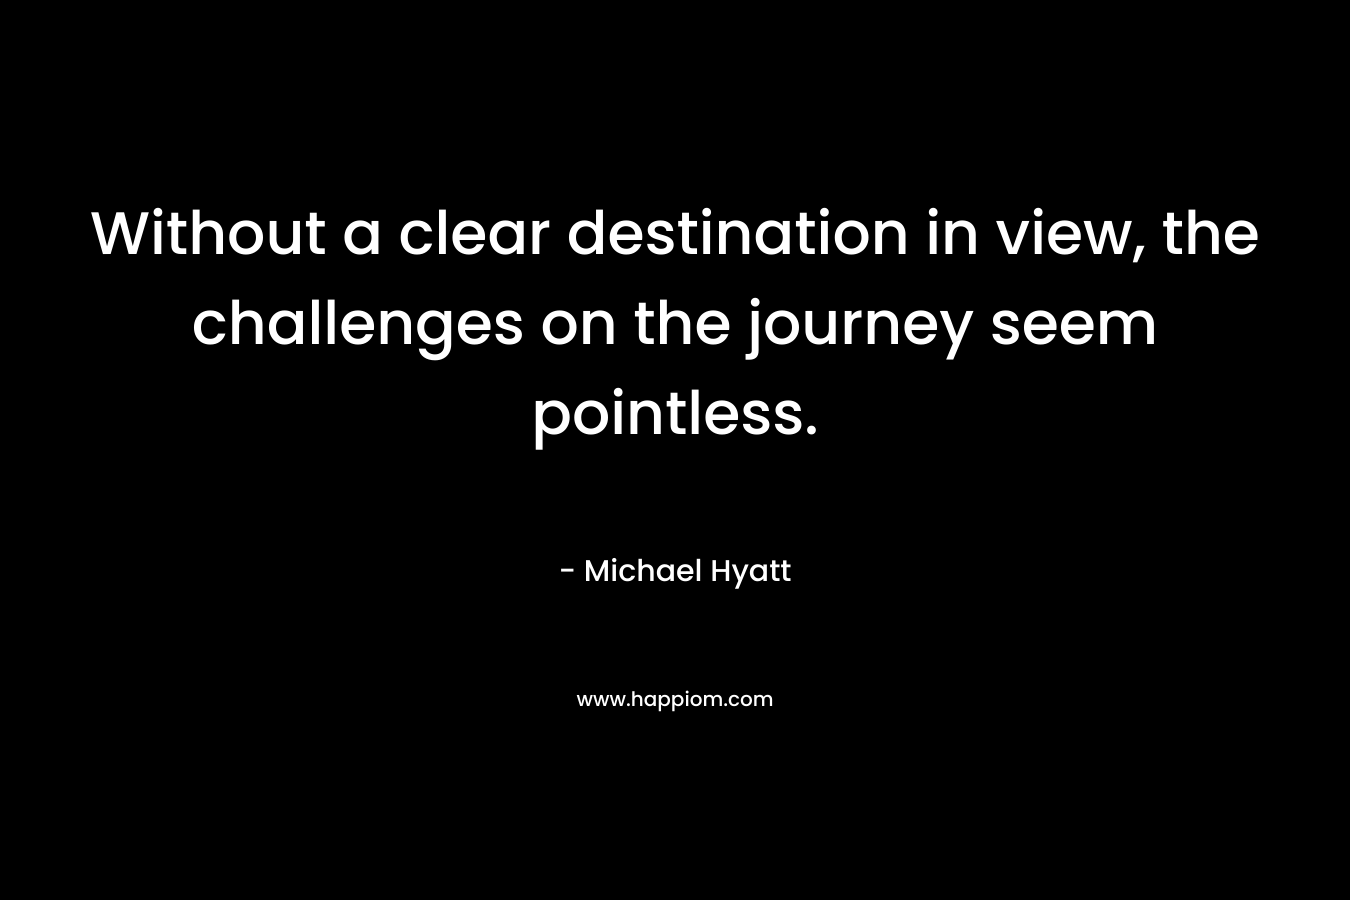 Without a clear destination in view, the challenges on the journey seem pointless.